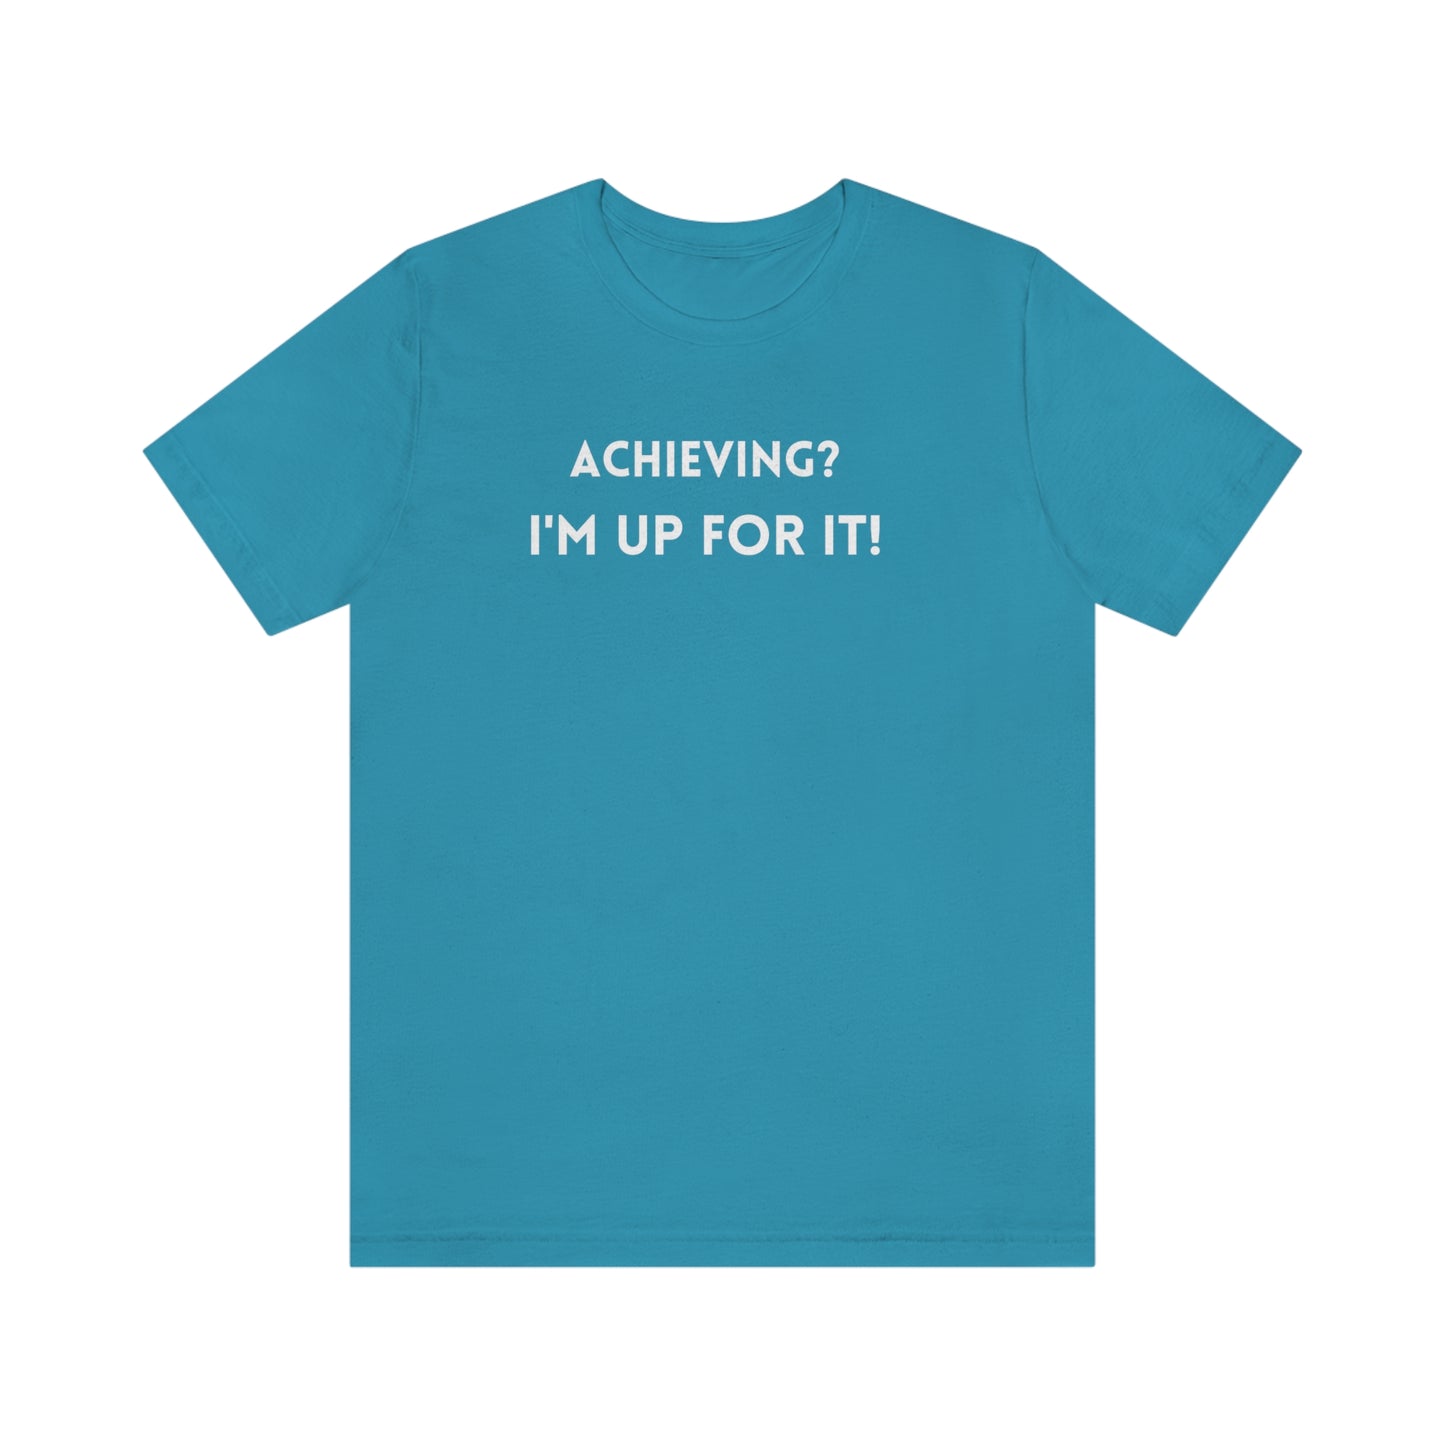 Achieving? I am up for it! t shirt t shirt with inspirational words t shirt gift for students self affirming words t shirt